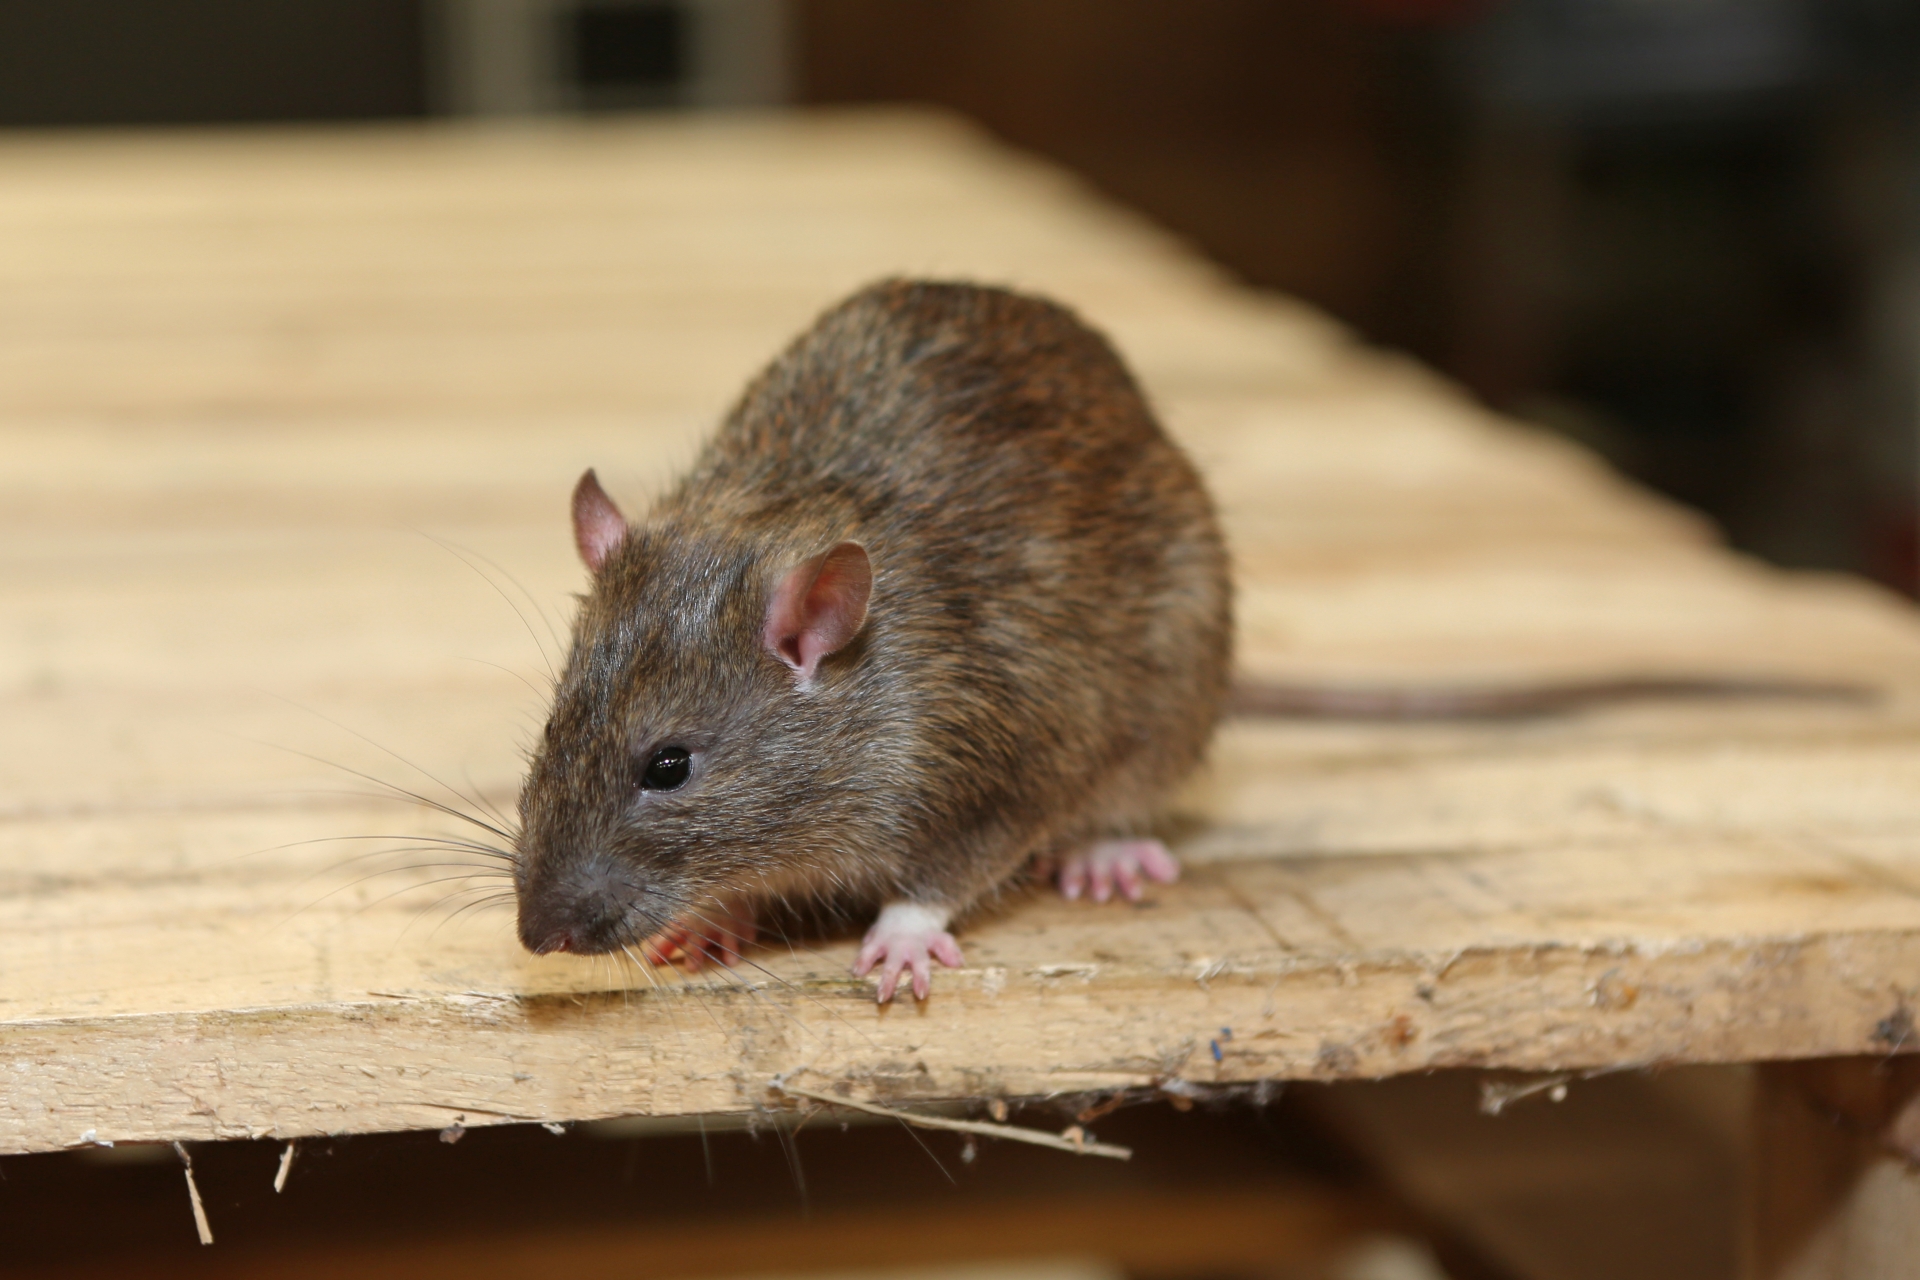 Rat Control, Pest Control in East Sheen, SW14. Call Now 020 8166 9746